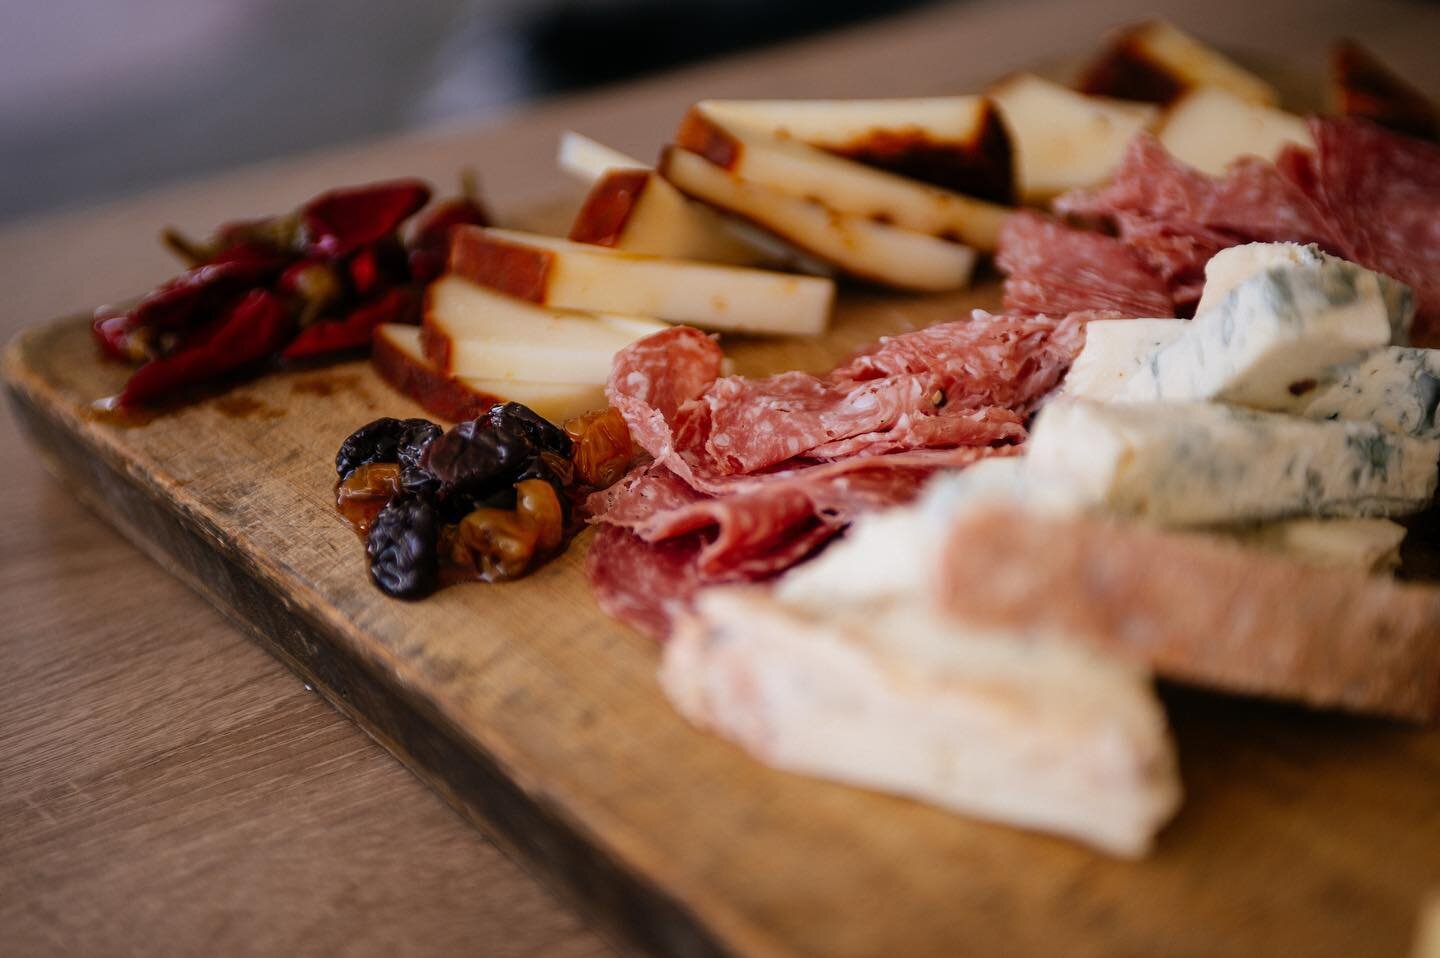 cheers to the weekend and sharing charcuterie boards with friends 🥂